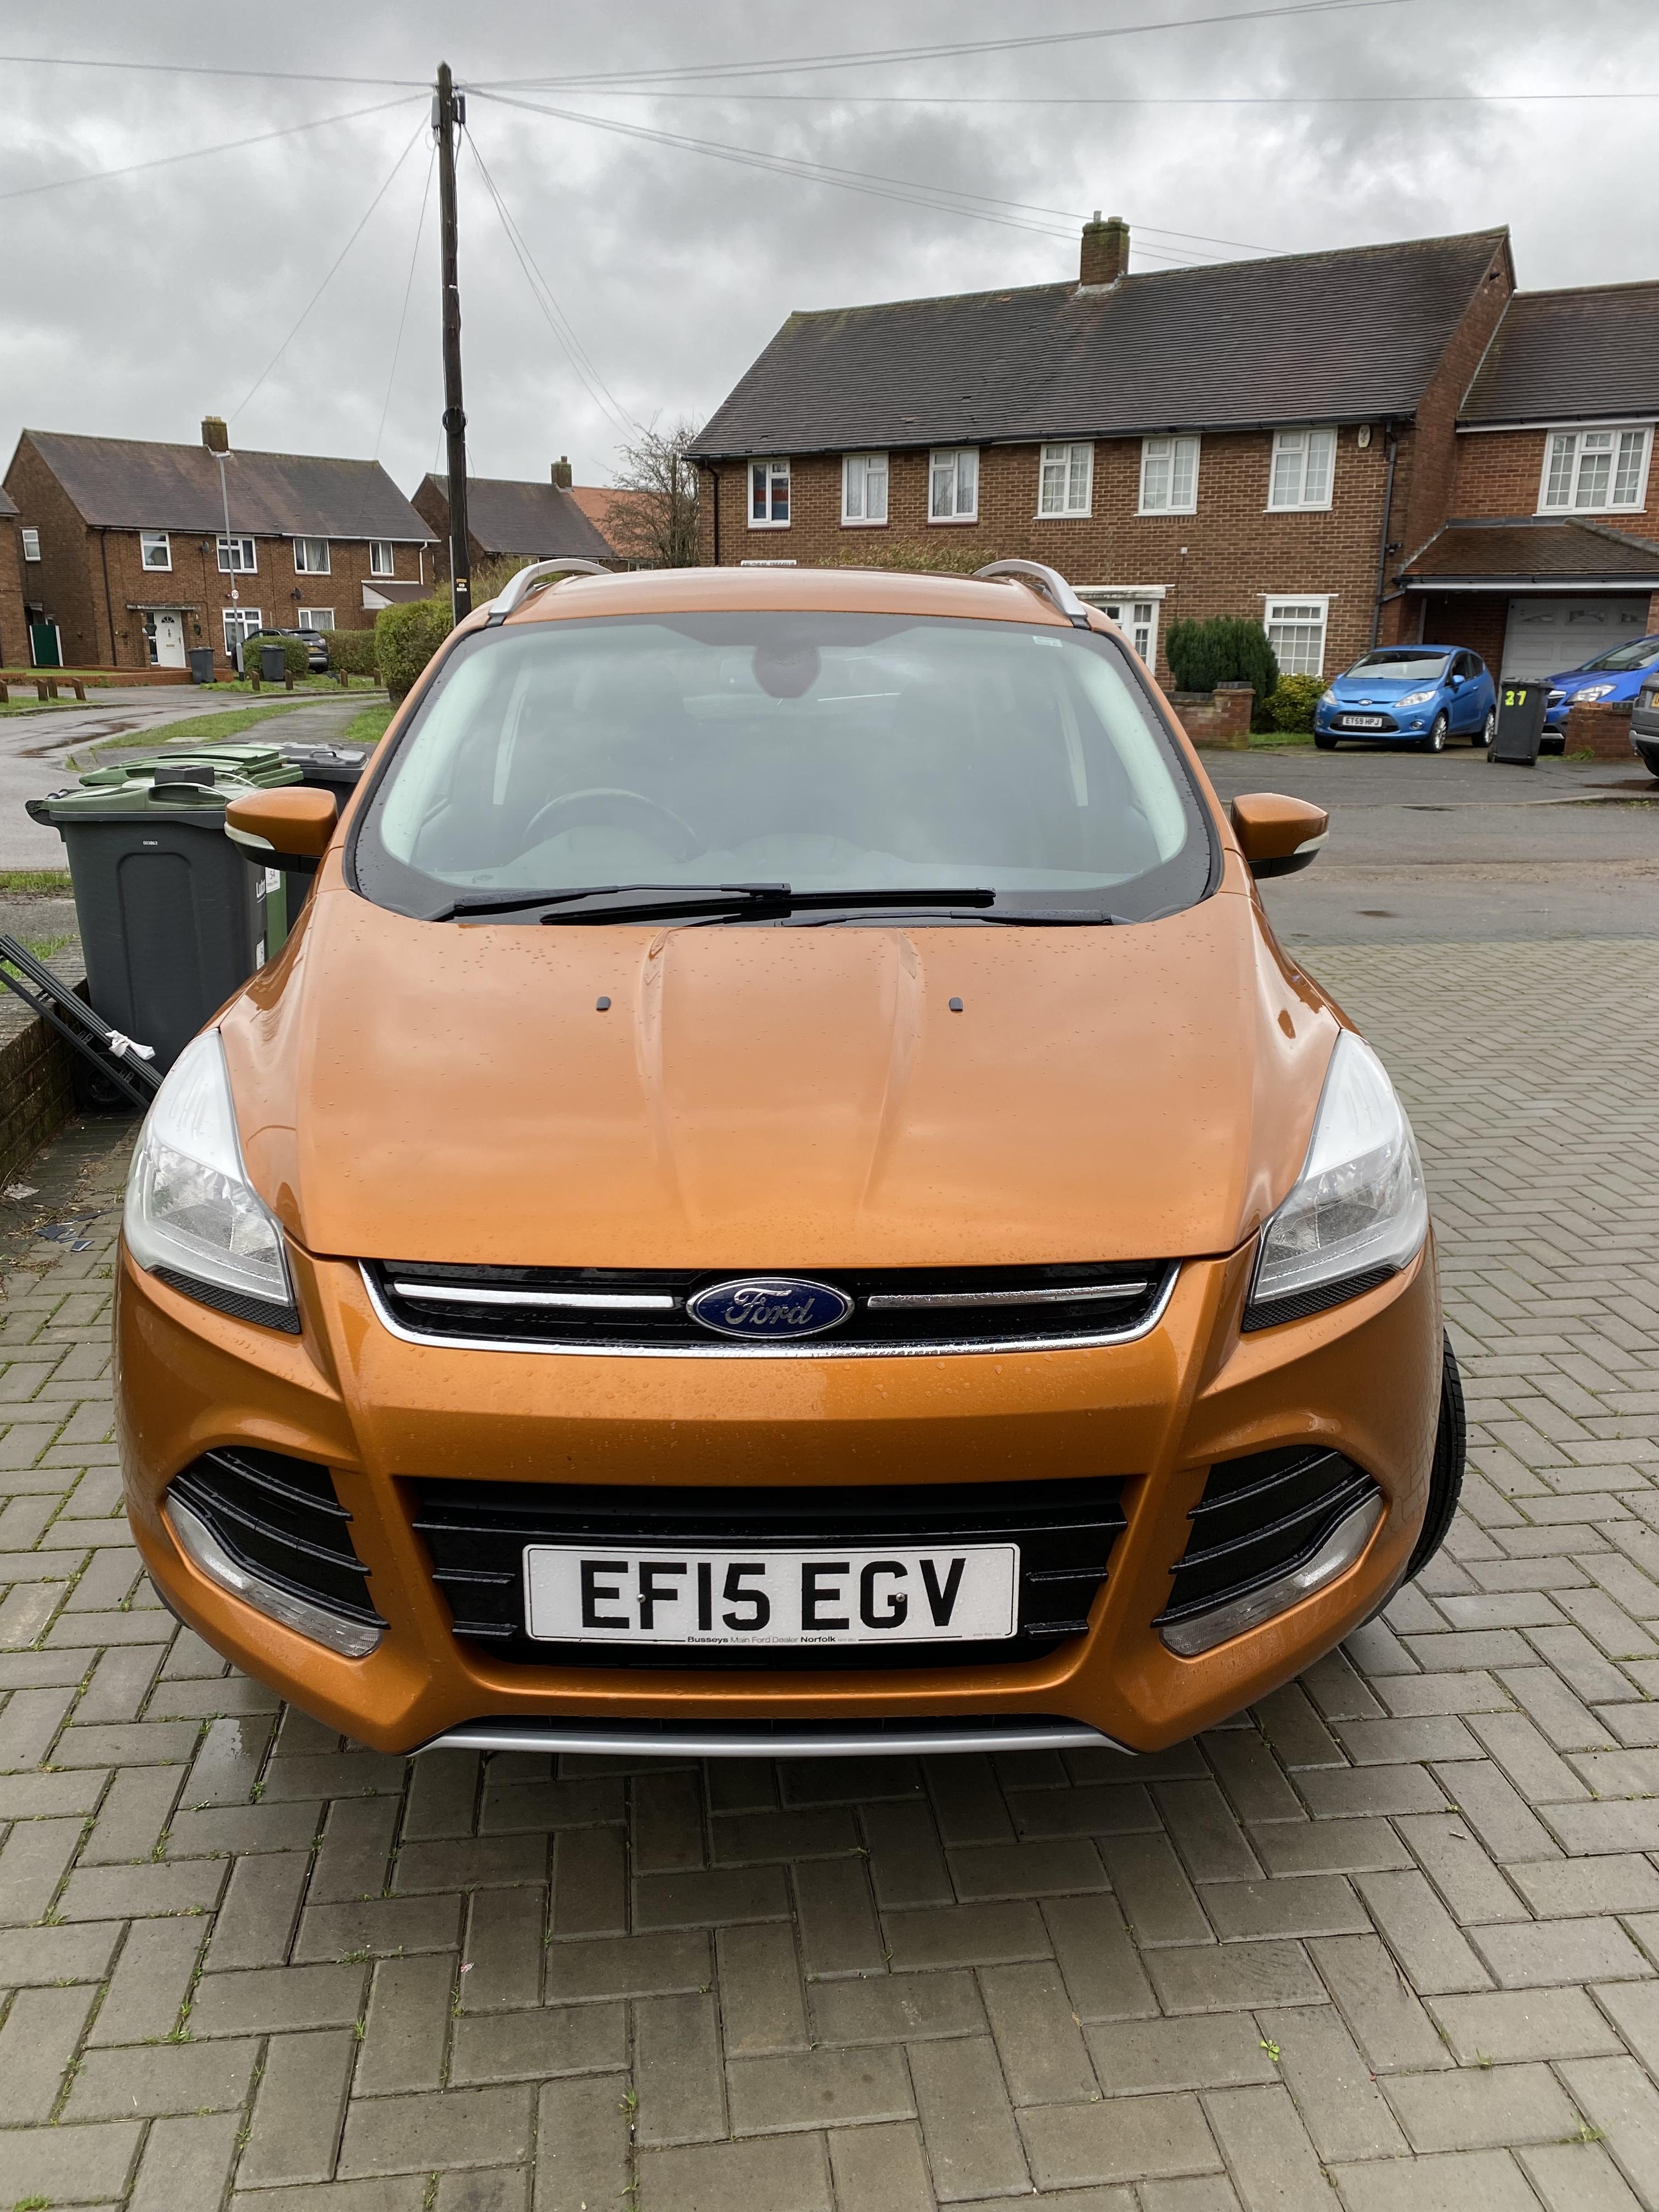 Wing mirrors won't fold - Ford Kuga Club - Ford Owners Club - Ford